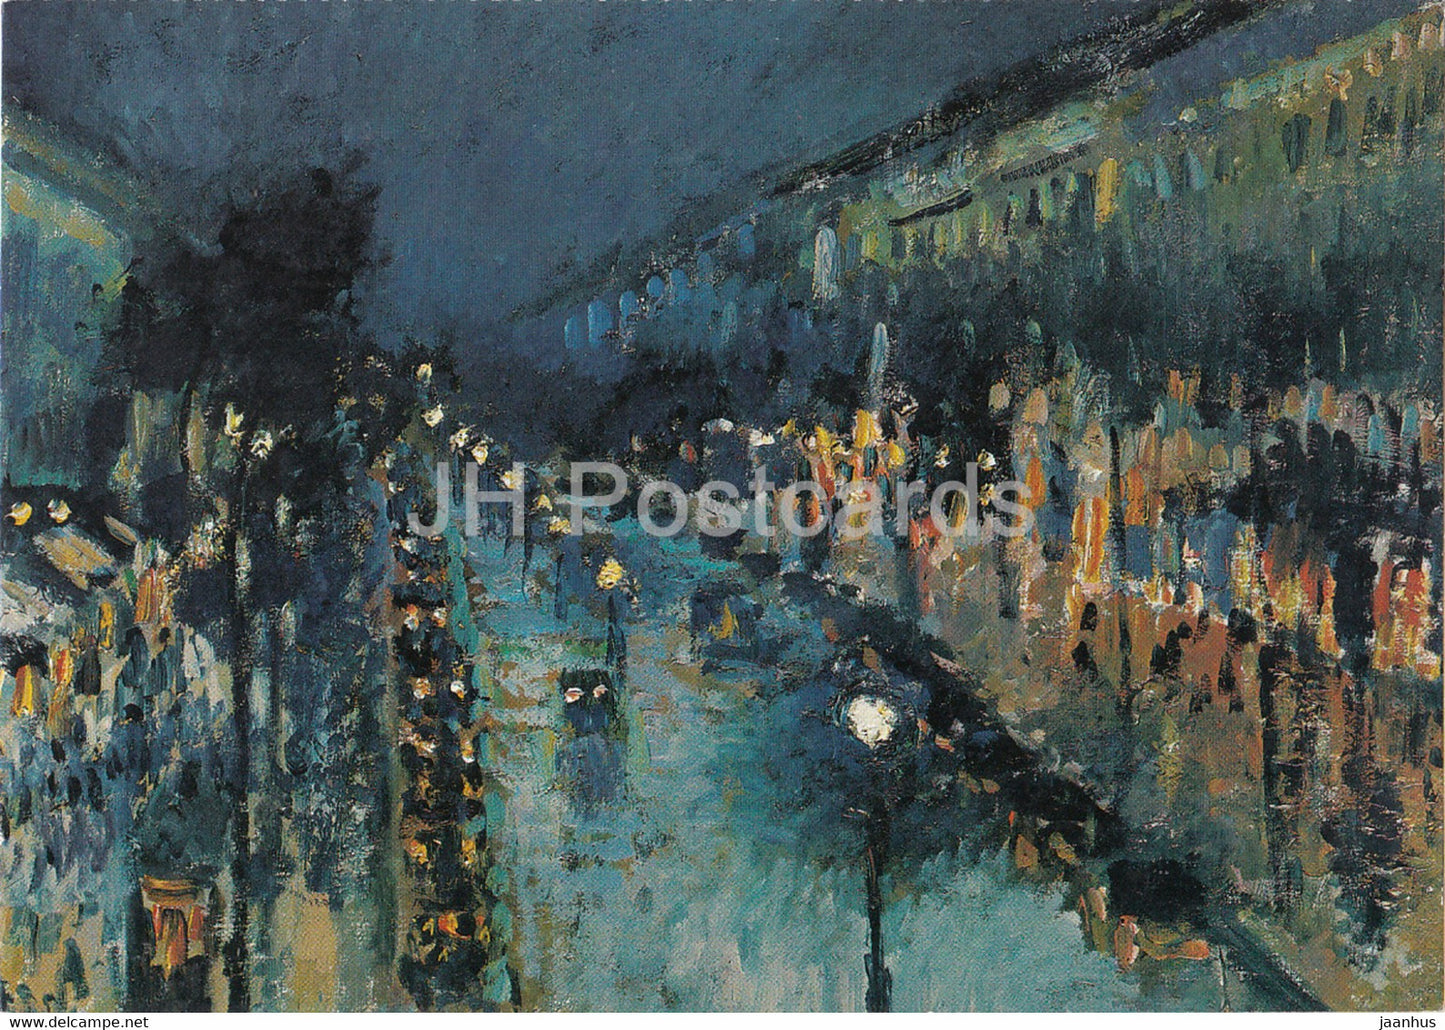 painting by Camille Pissarro - Boulevard Montmartre bei Nacht - French art - Germany - unused - JH Postcards